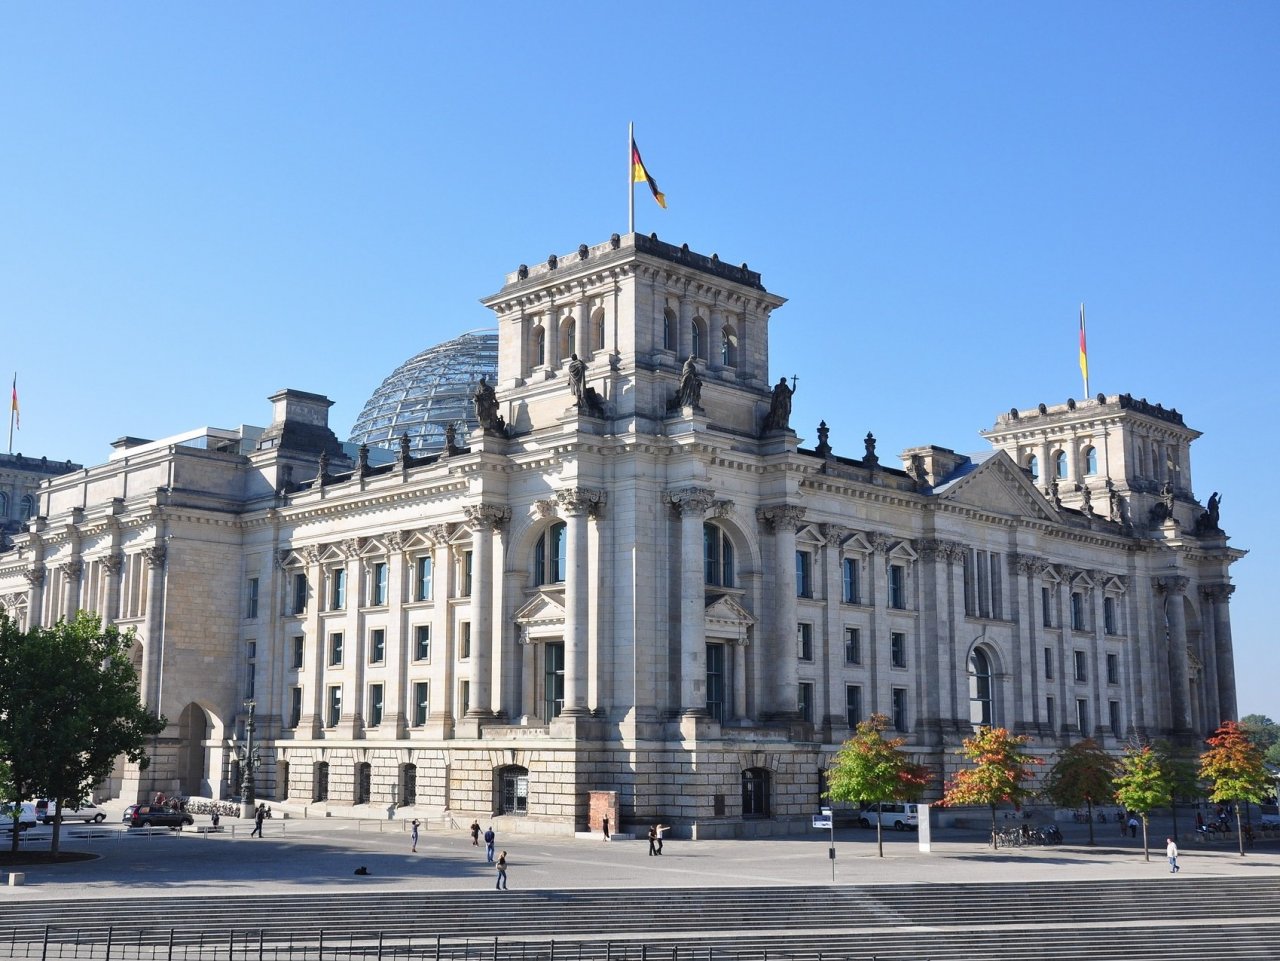 The Reichstag jigsaw puzzle